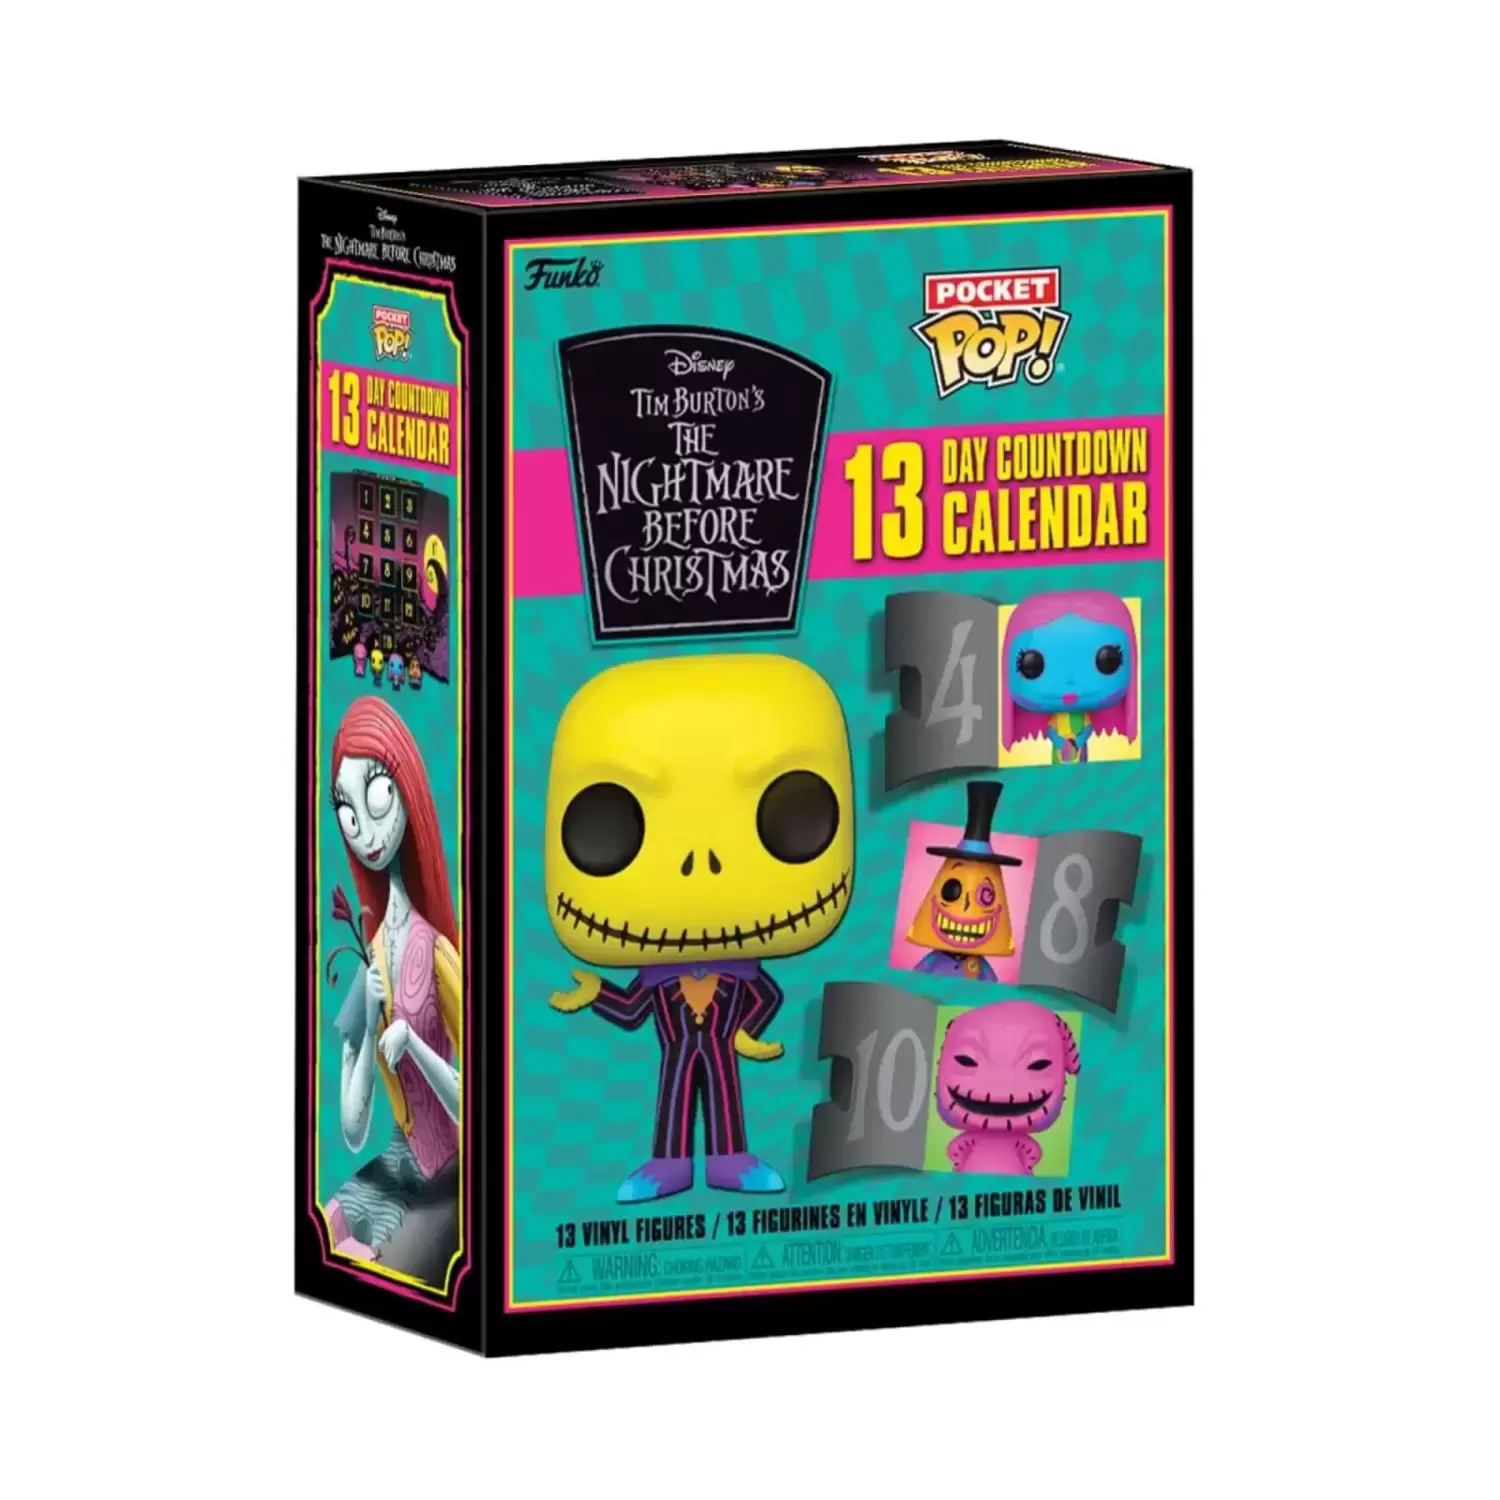 Pocket Pop! and Pop Minis! - The Nightmare Before Christmas - 13 Day Countdown Calendar